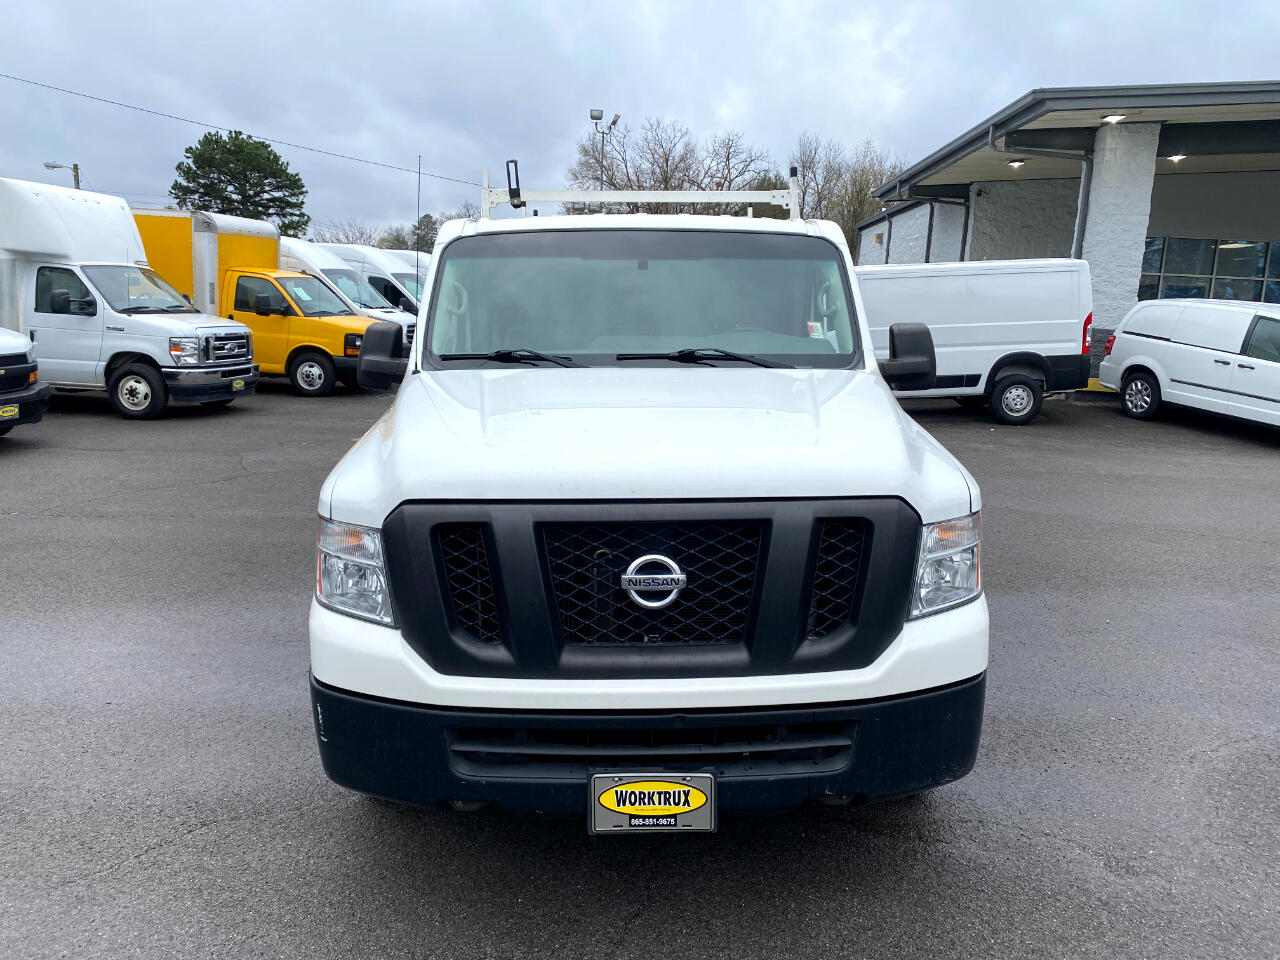 Used 2018 Nissan NV Cargo NV1500 Standard Roof V6 S for Sale in Knoxville  TN 37912 WorkTrux